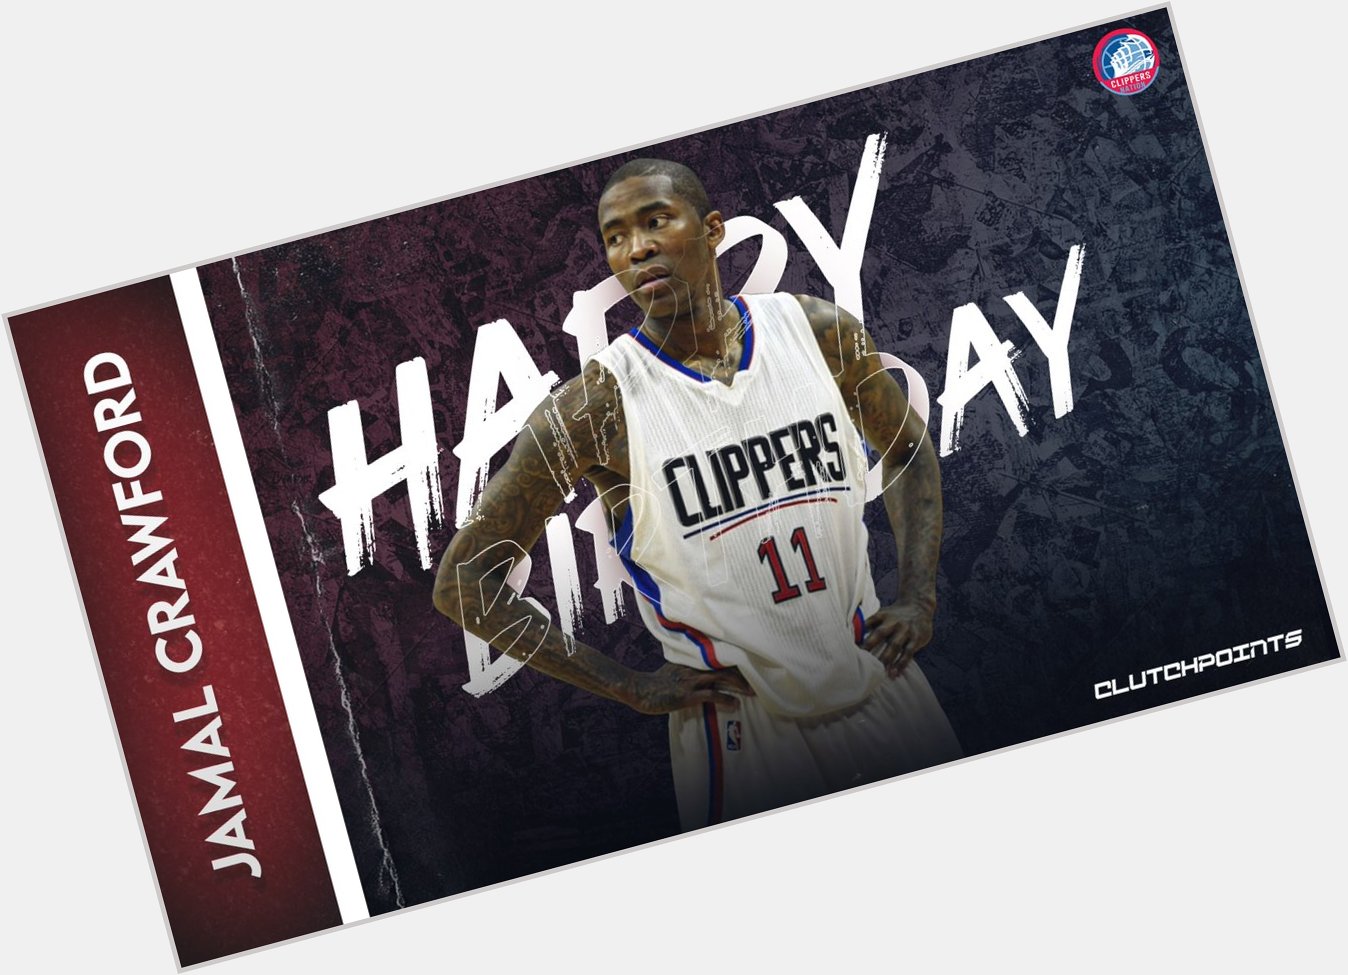 Join Clippers Nation in greeting Jamal Crawford a happy 41st birthday! 